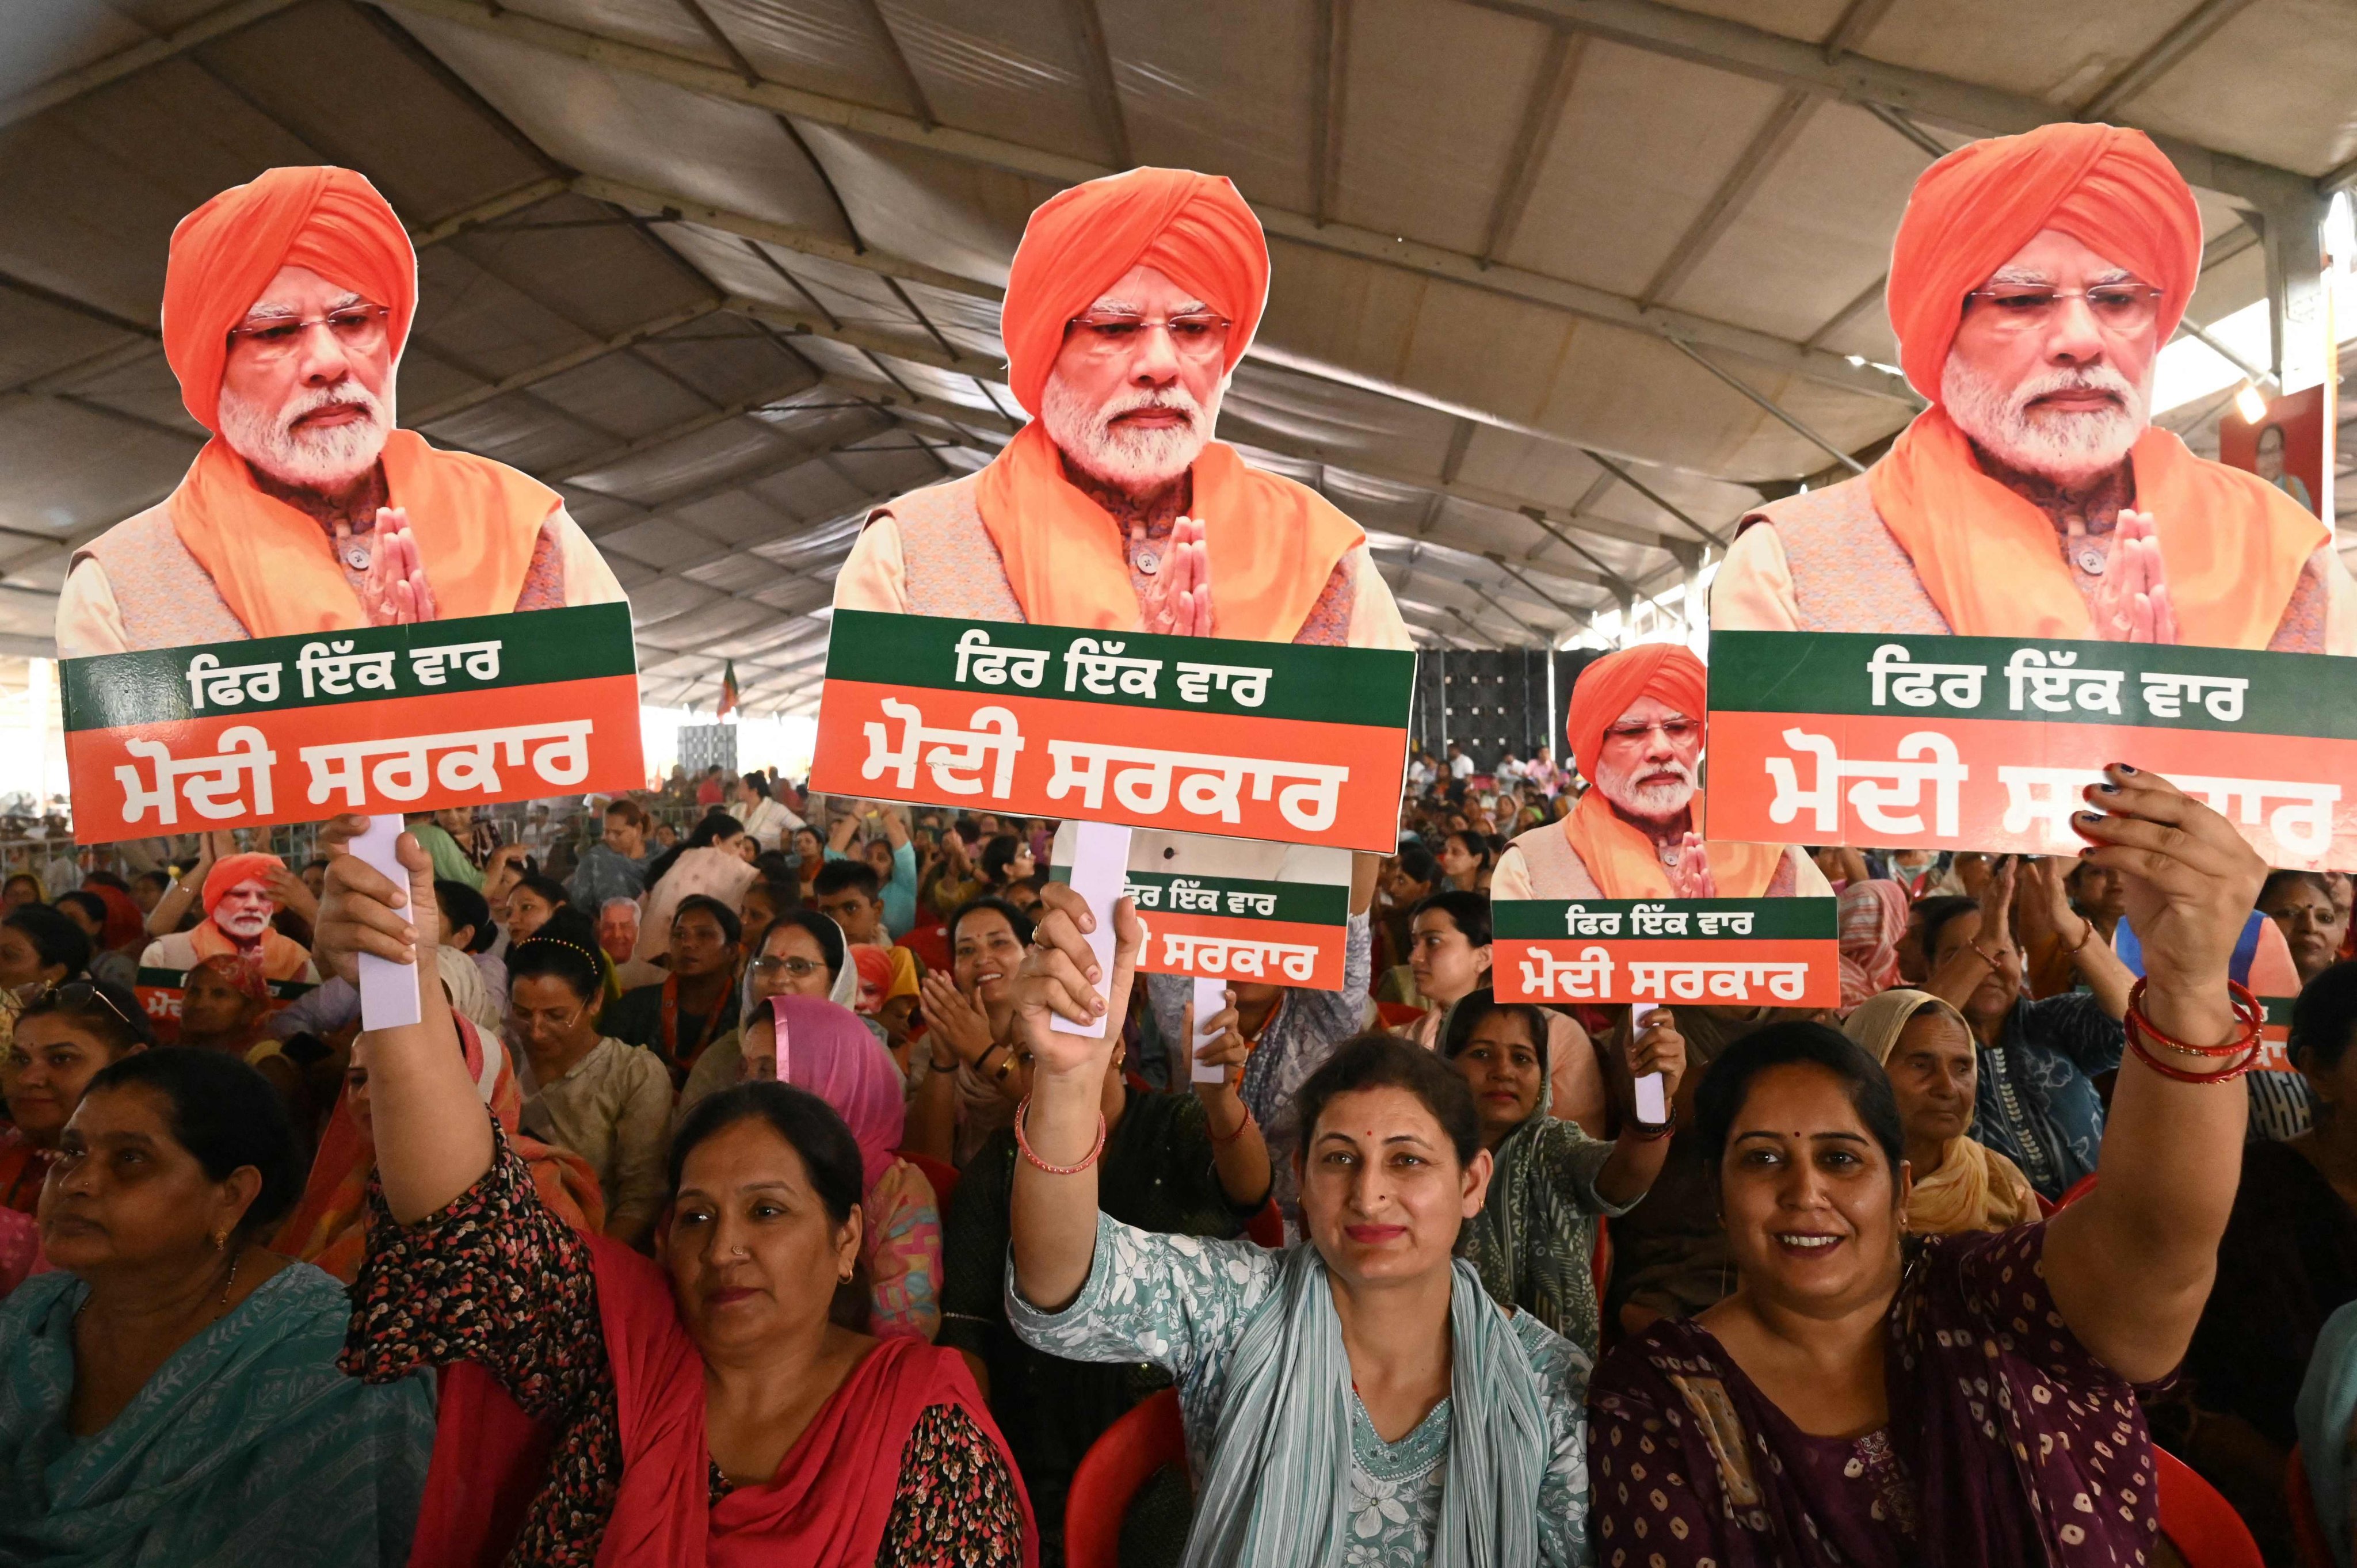 Supporters hold cut-outs of India’s Prime Minister and leader of the ruling Bharatiya Janata Party (BJP) Narendra Modi during an election campaign rally in Gurdaspur. Photo: AFP